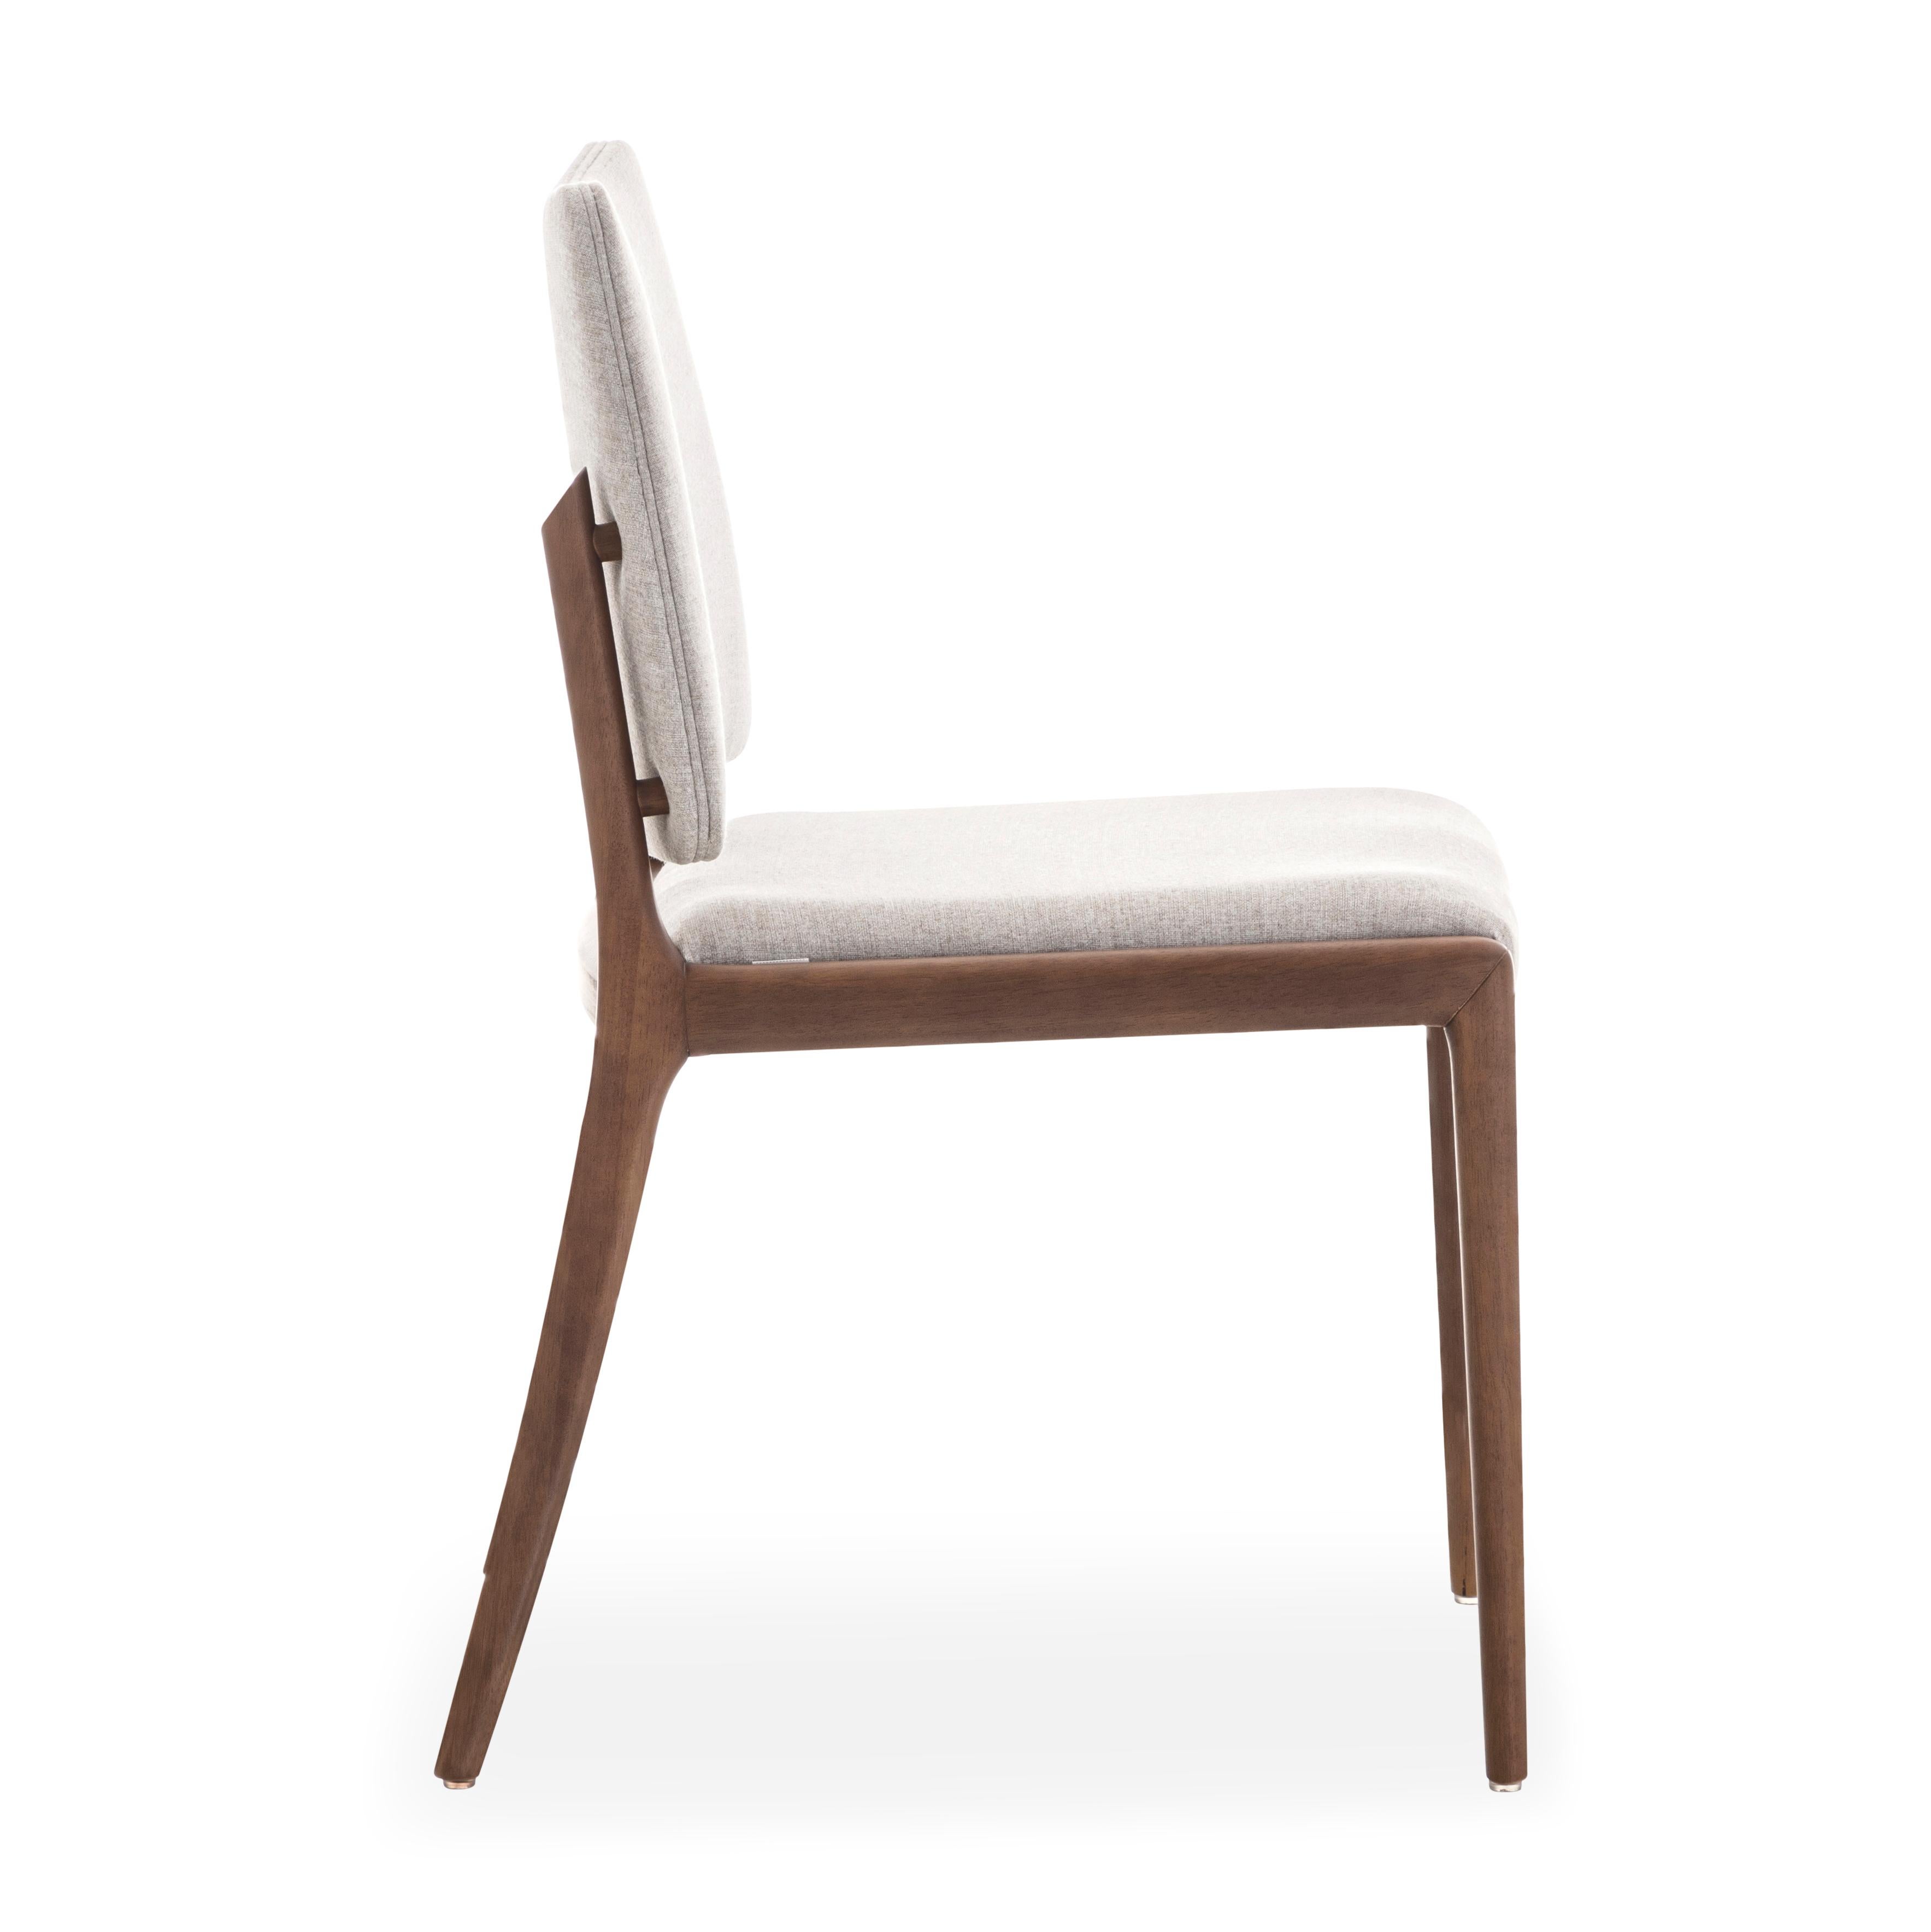 Slit Dining Chair in Walnut Wood Finish and Light Beige Cotton Fabric, Set of 2 In New Condition For Sale In Miami, FL